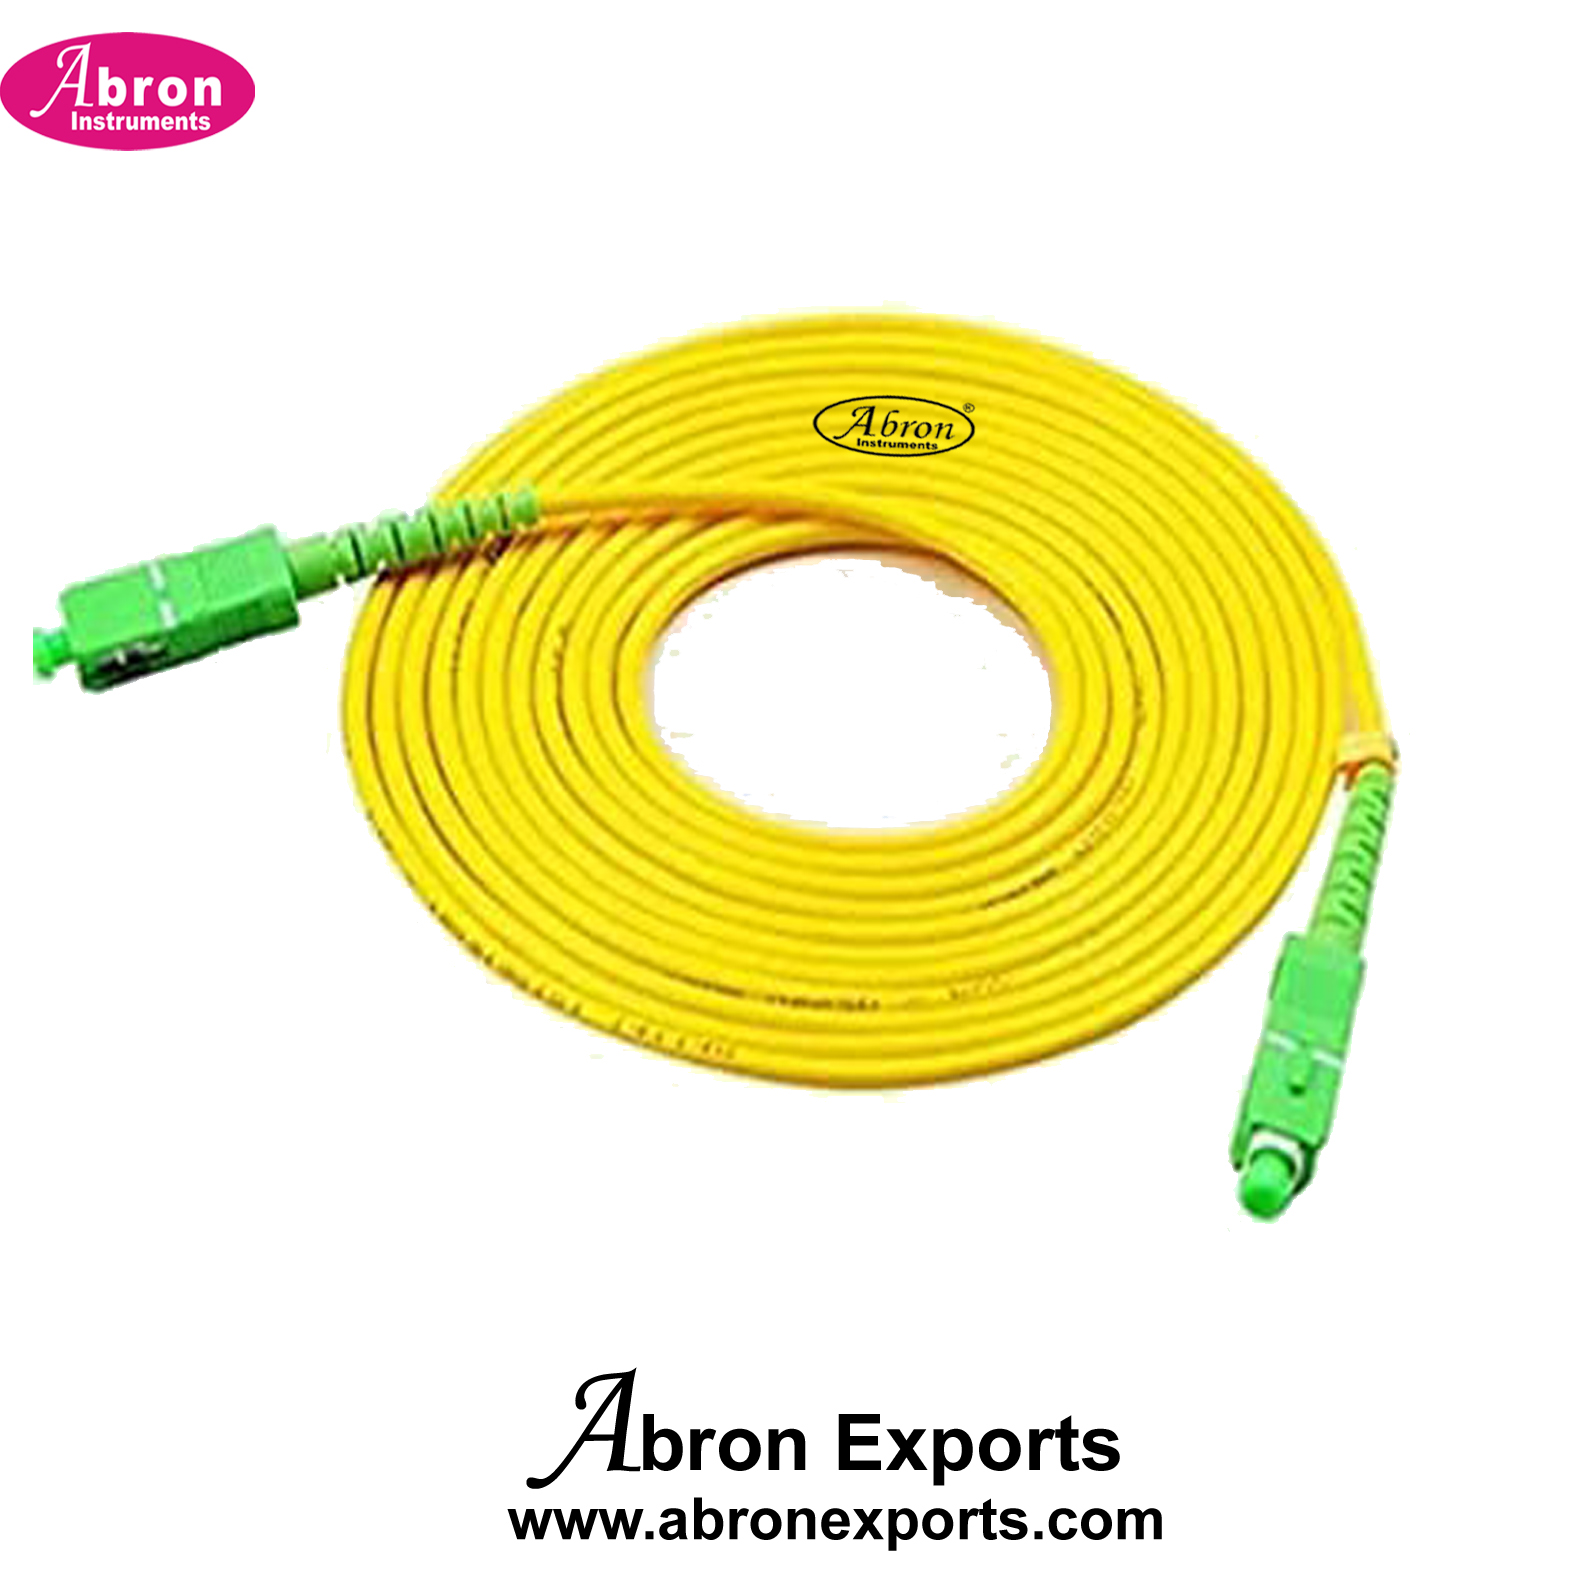 Fiber Cable Roll Single Mode SC to SC Optical Fiber Patch Cord 9-125 Jumper Cable 5 Meters 15 ft Abron AE1403F15 